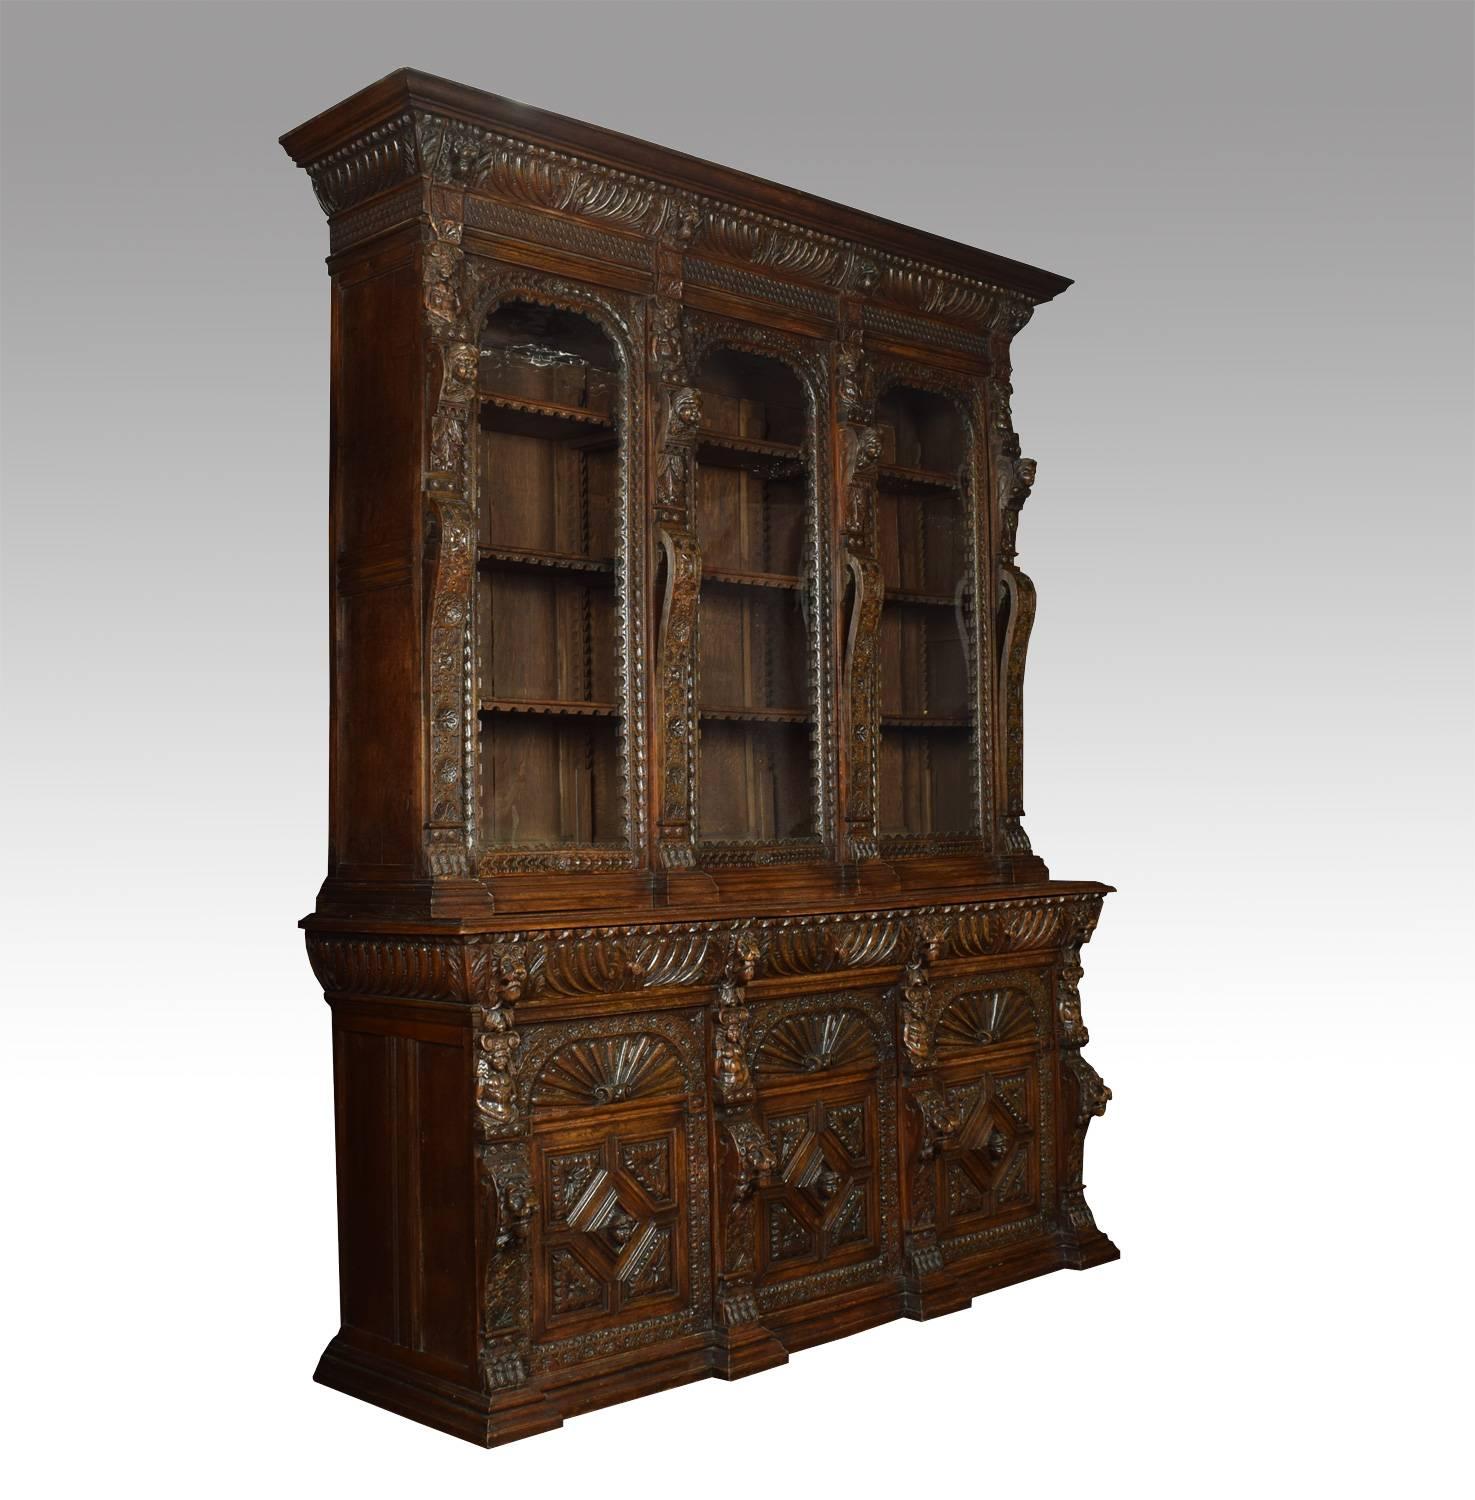 Large Renaissance Revival carved oak three-door bookcase, the deep cornice above a chip-carved and gadrooned frieze above three large glazed doors enclosing adjustable shelved interior, flanked by pilasters carved with lion and figural masks; the